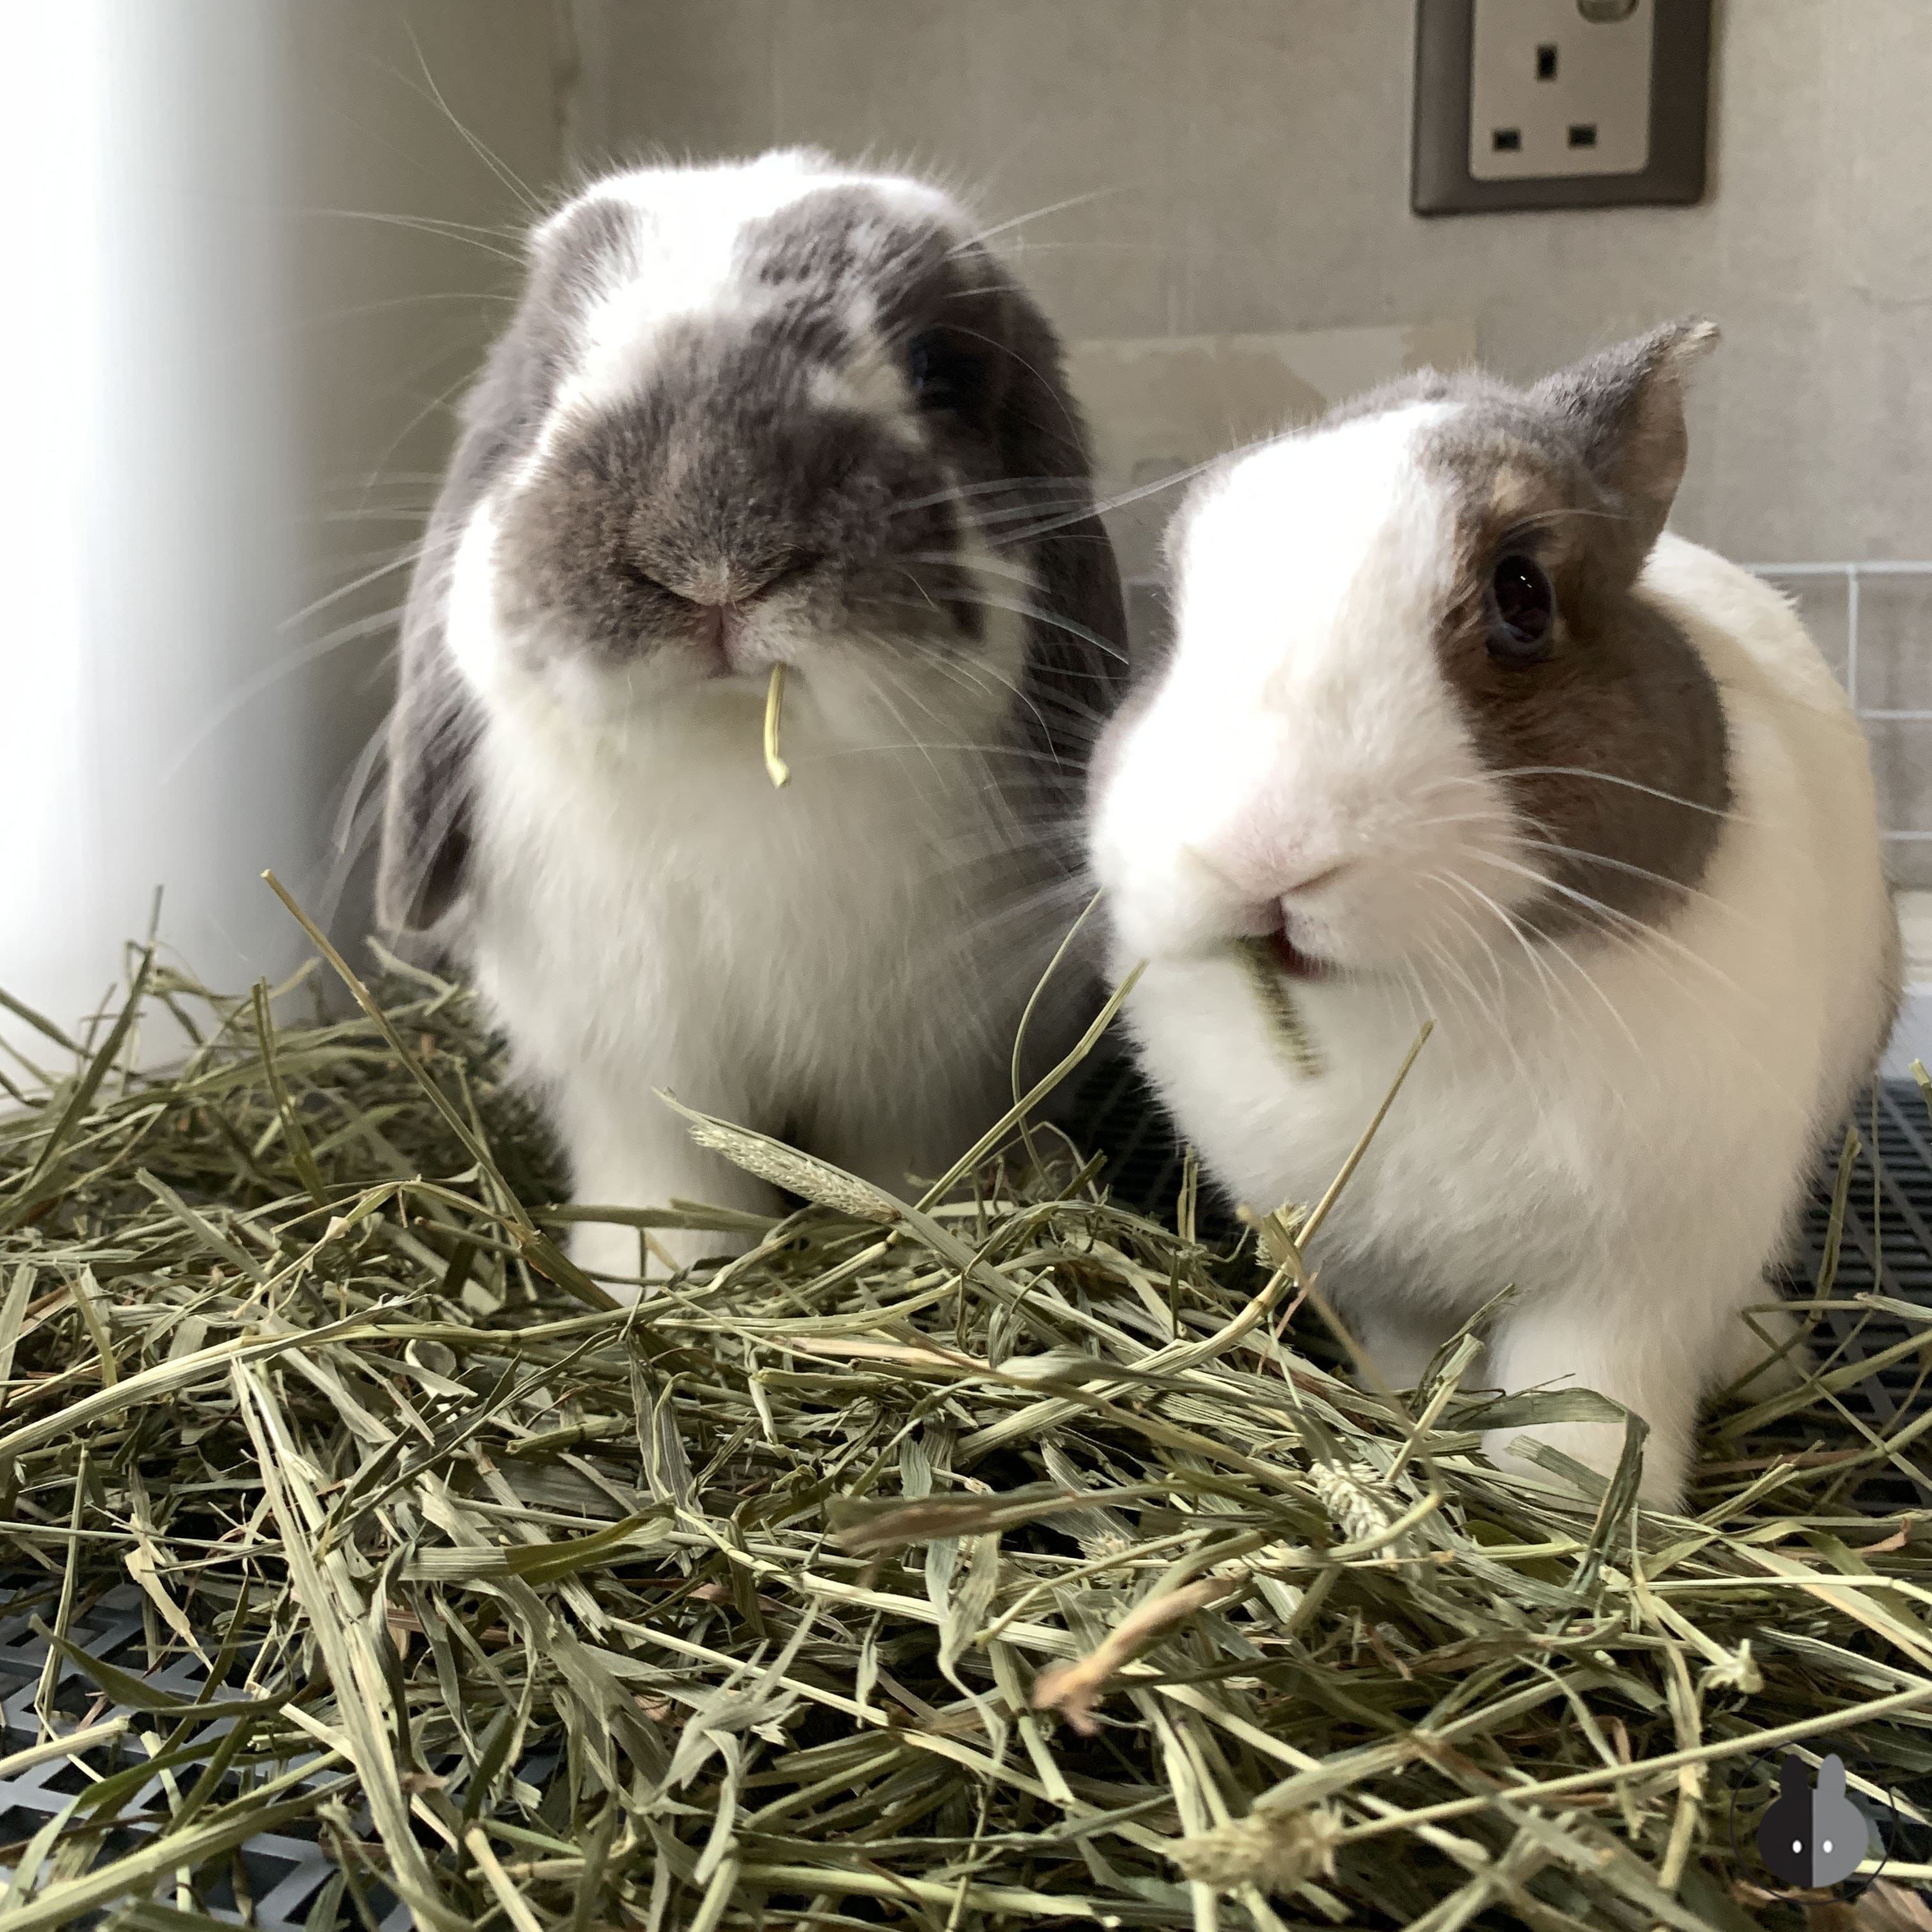 My bunnies - Dozy and Chewy munching on hay